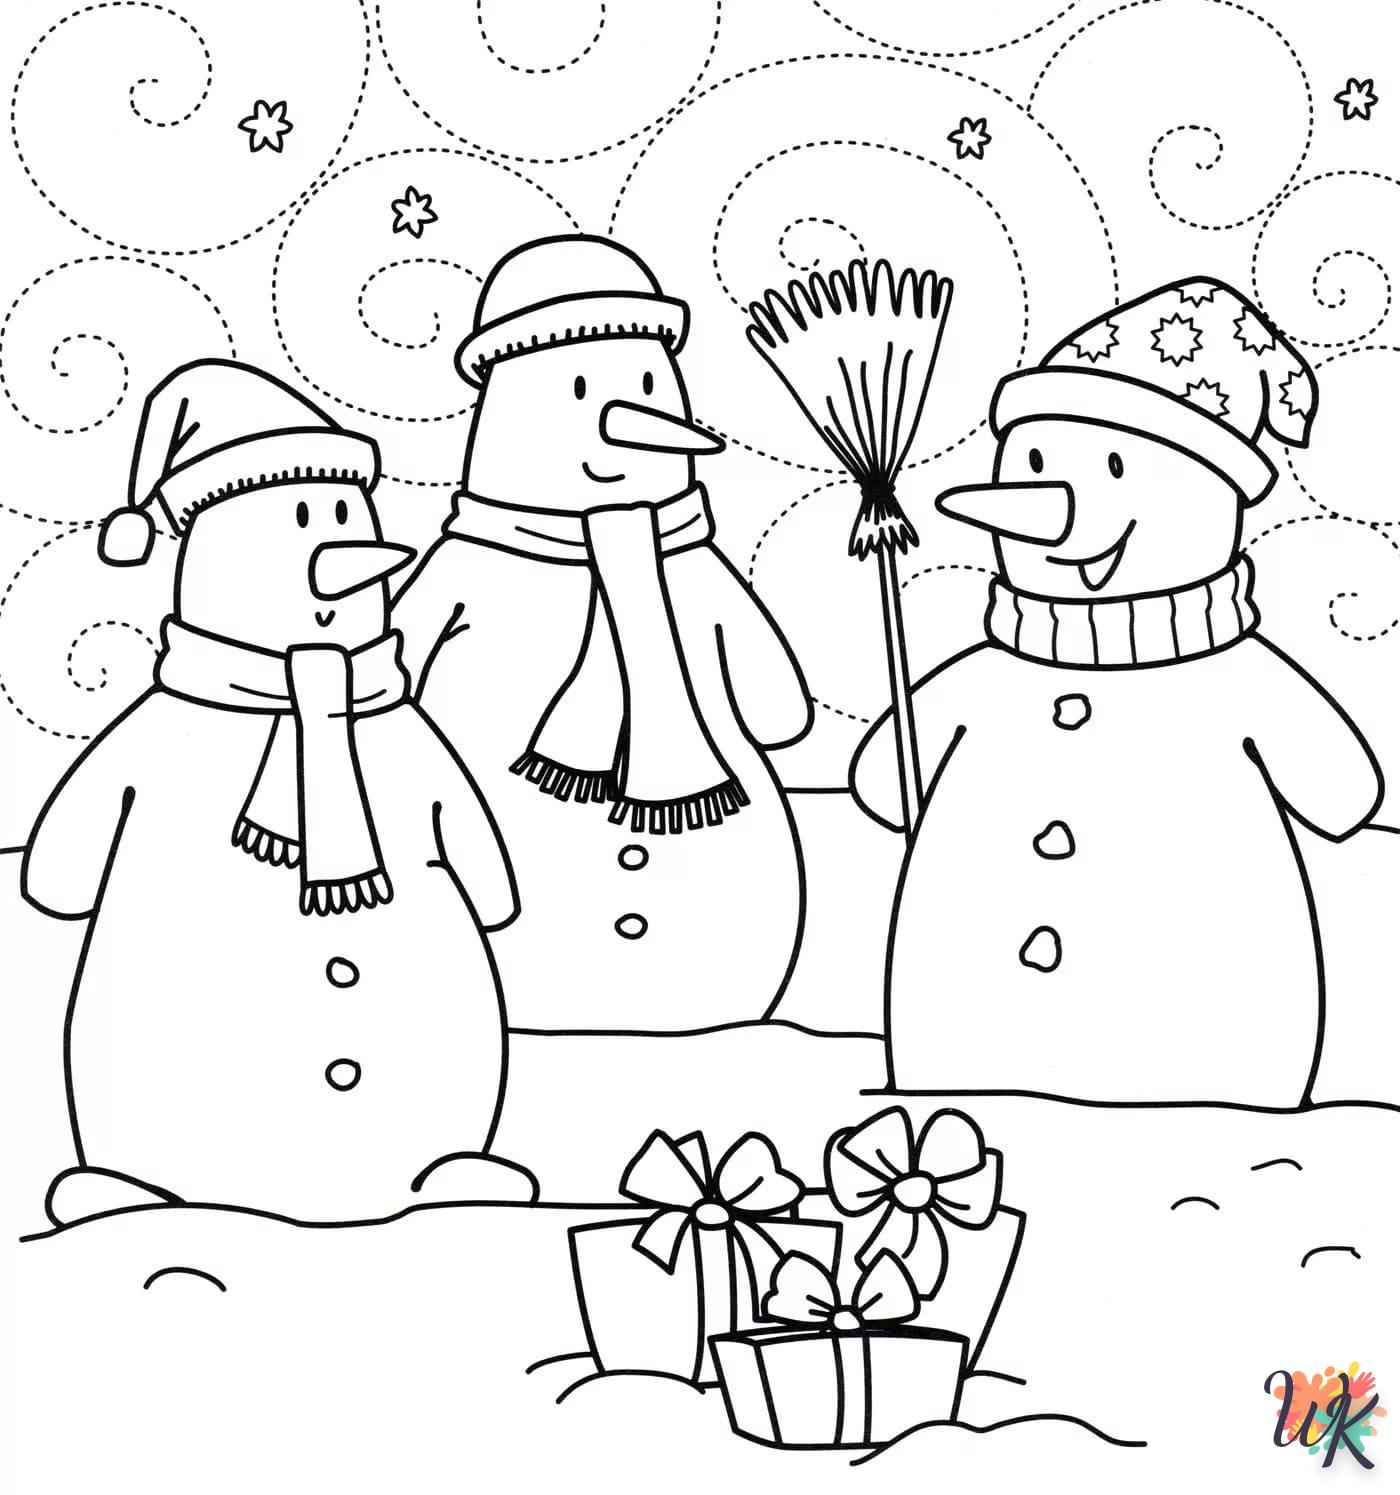 Snowman coloring page to color online for free